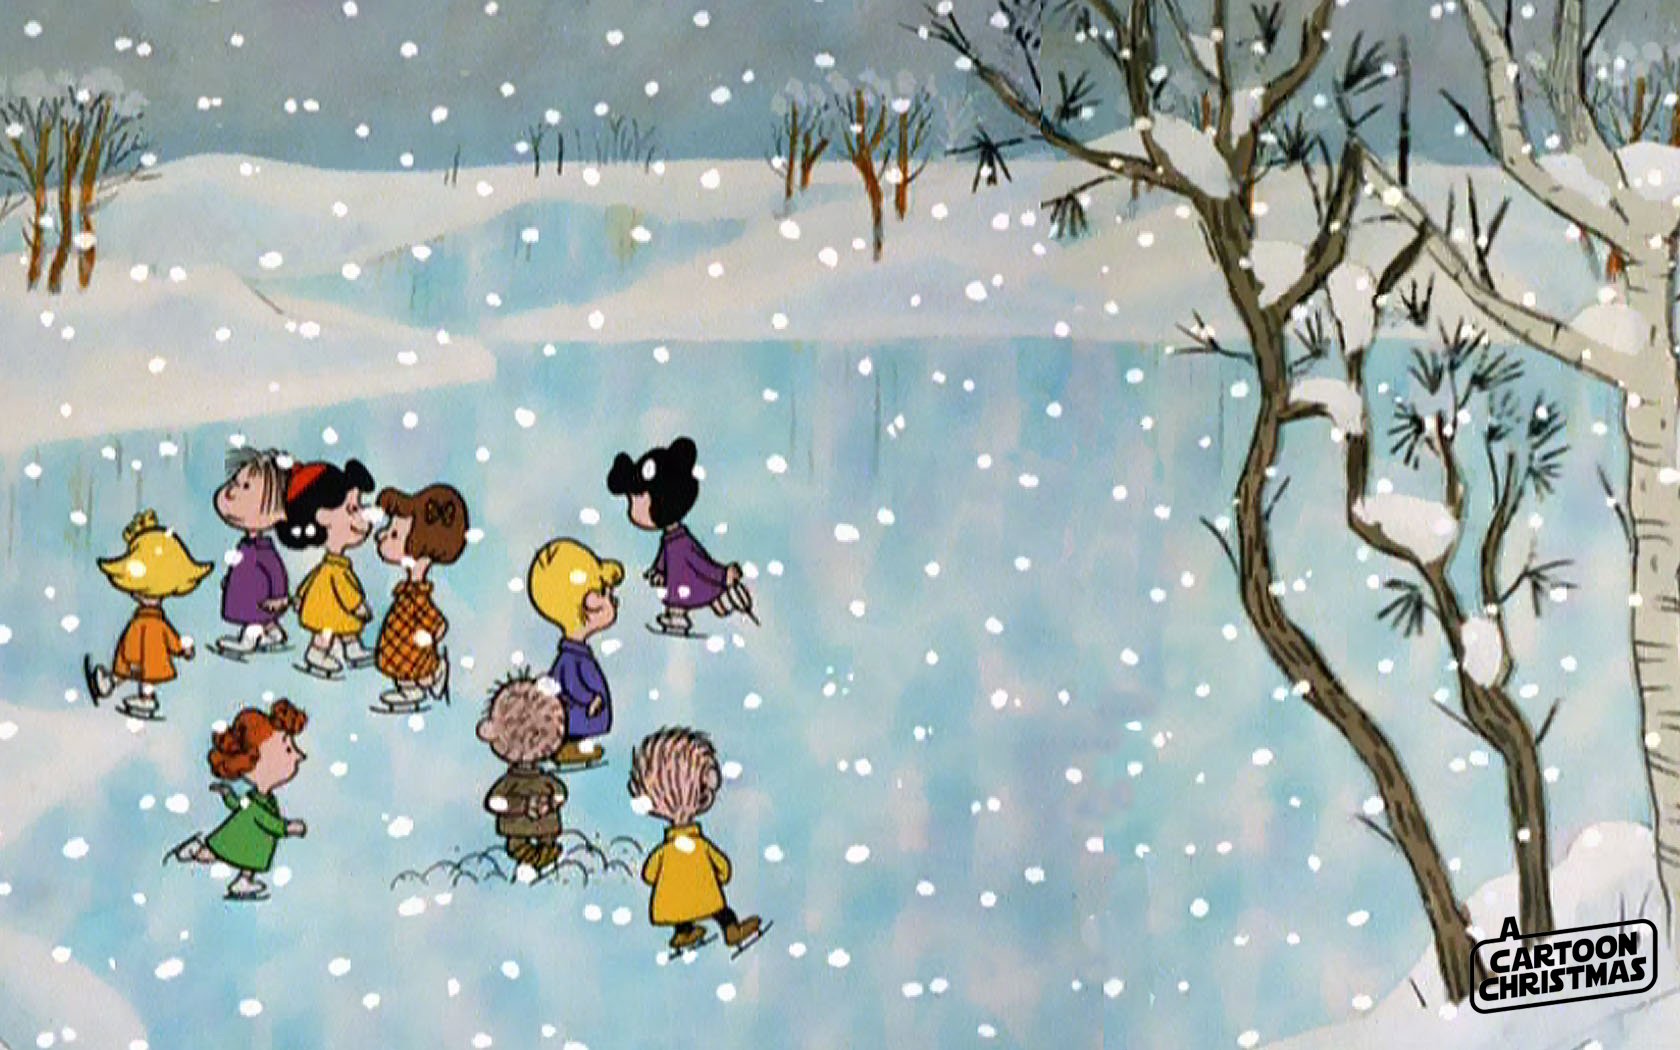  Charlie Brown Chrismas Wallpapers right here A Cartoon Christmas